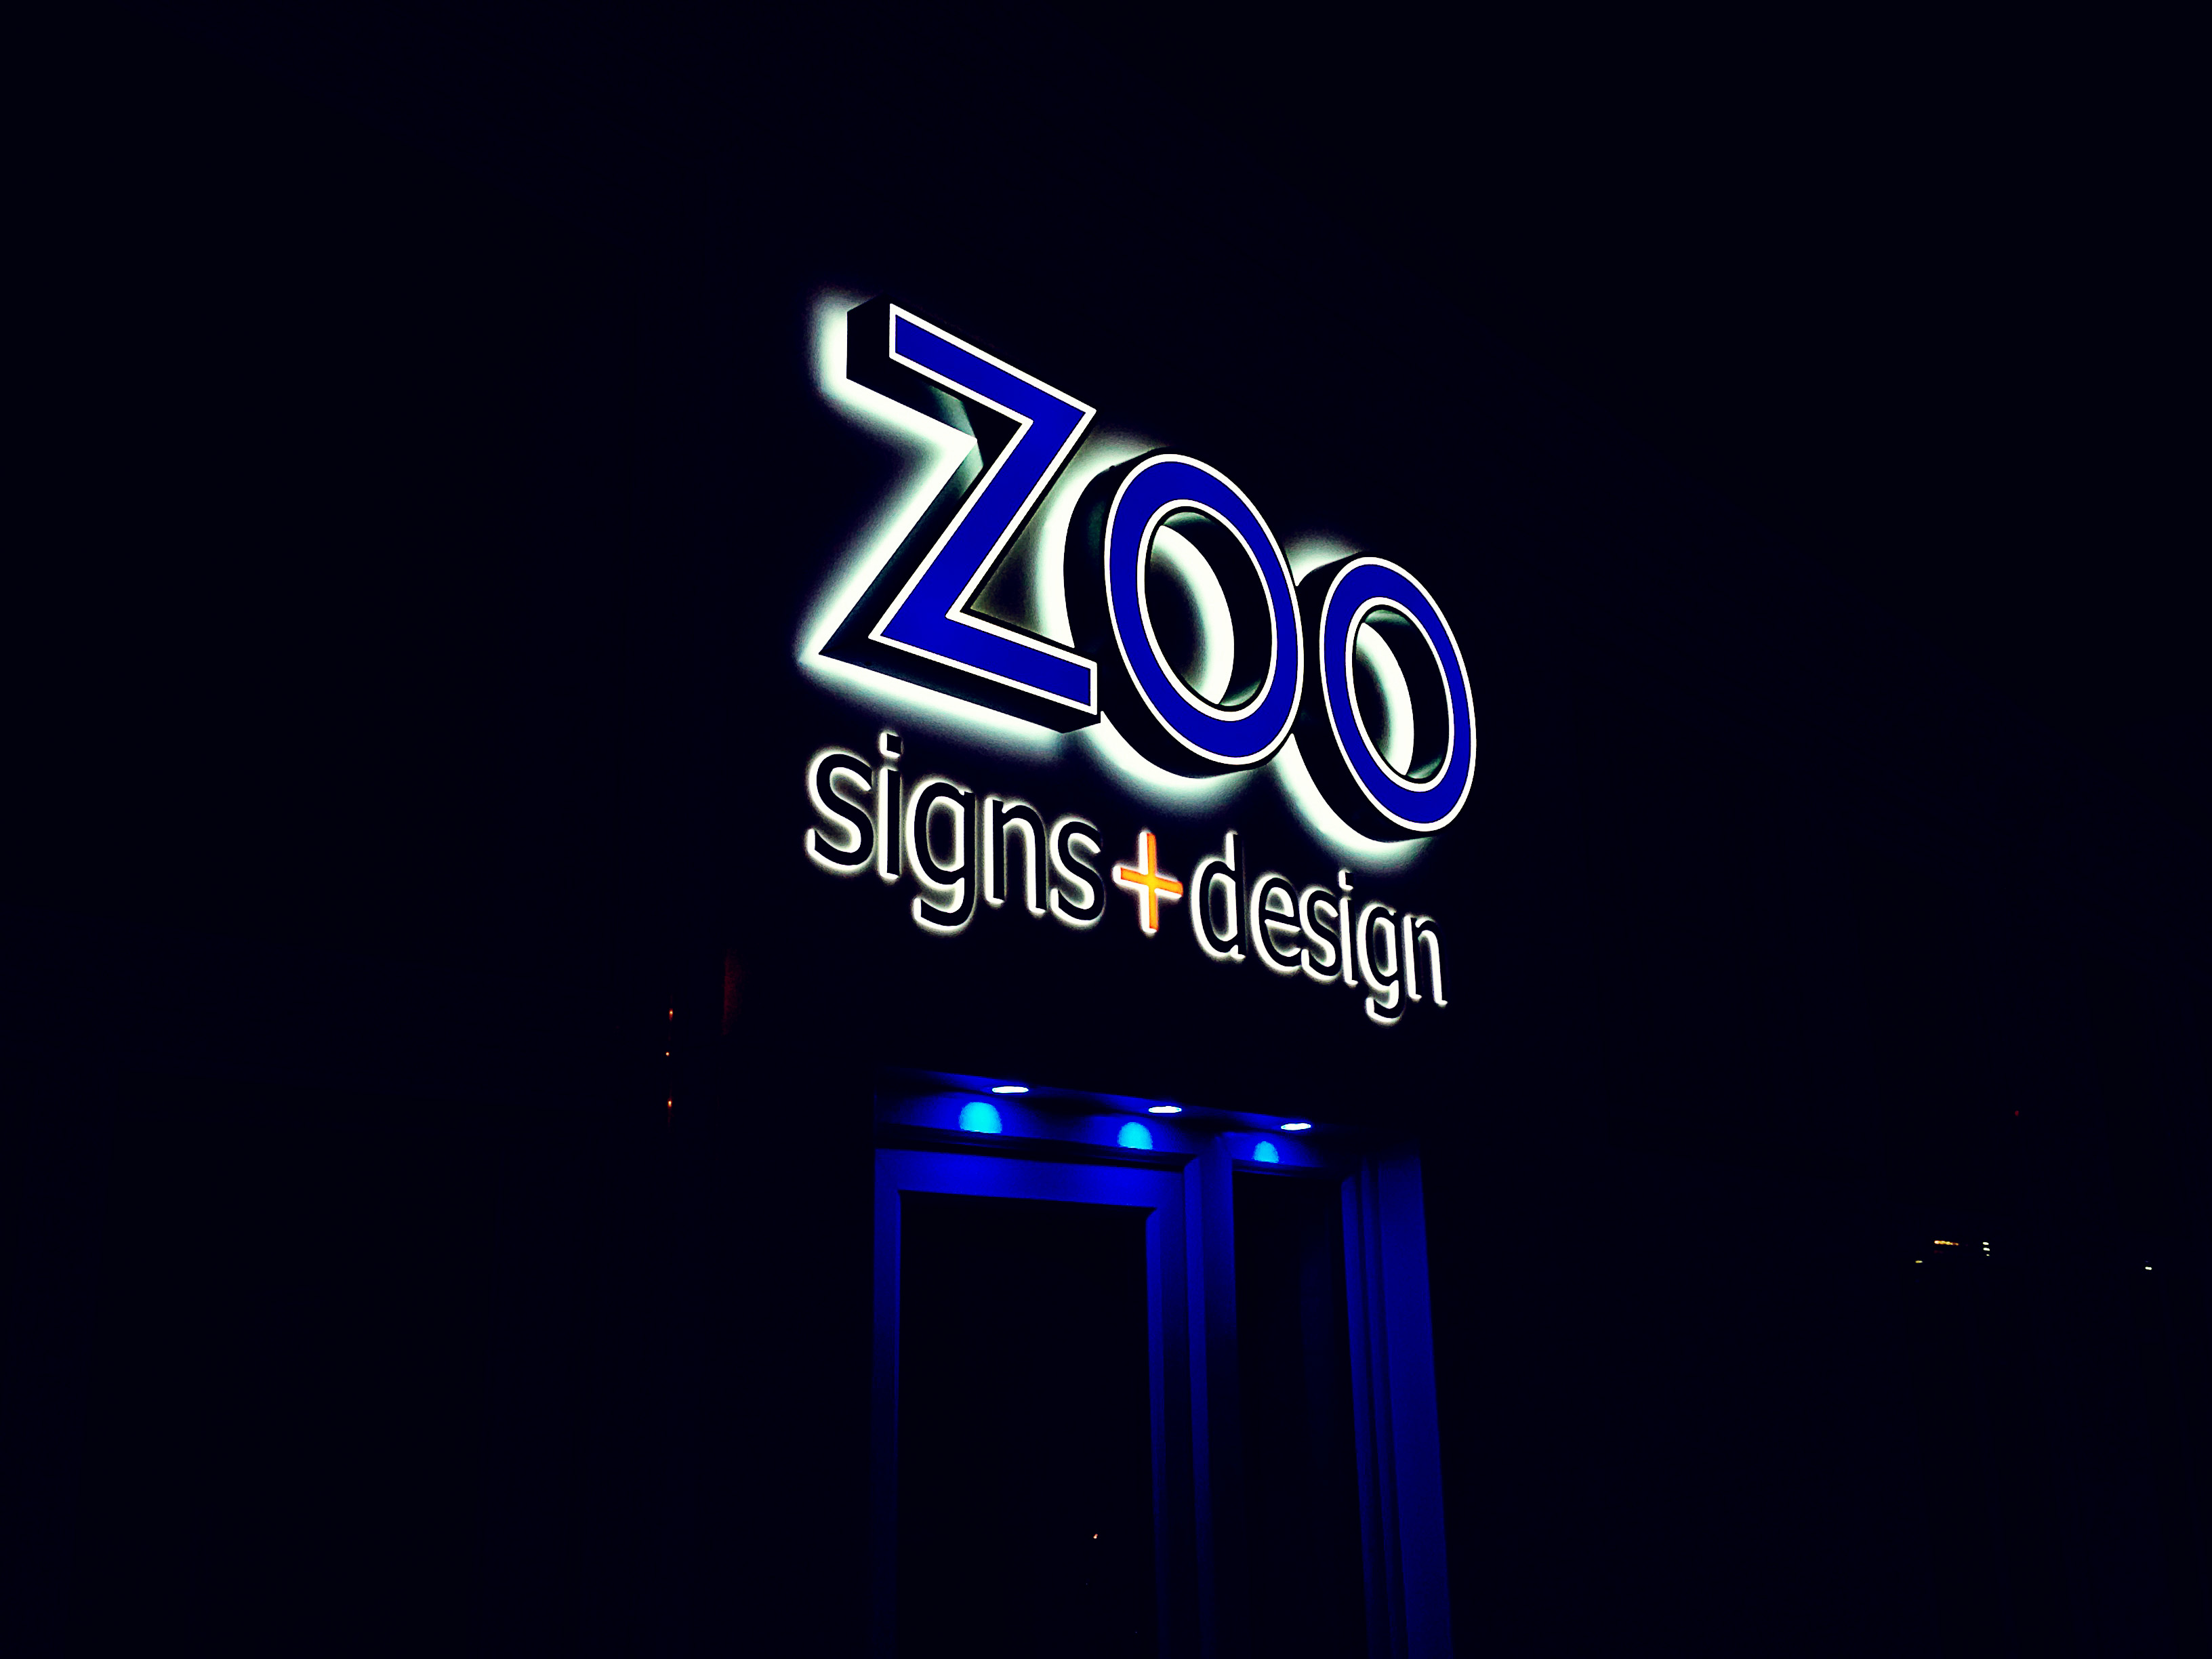 Main image for Zoo Signs & Design Ltd